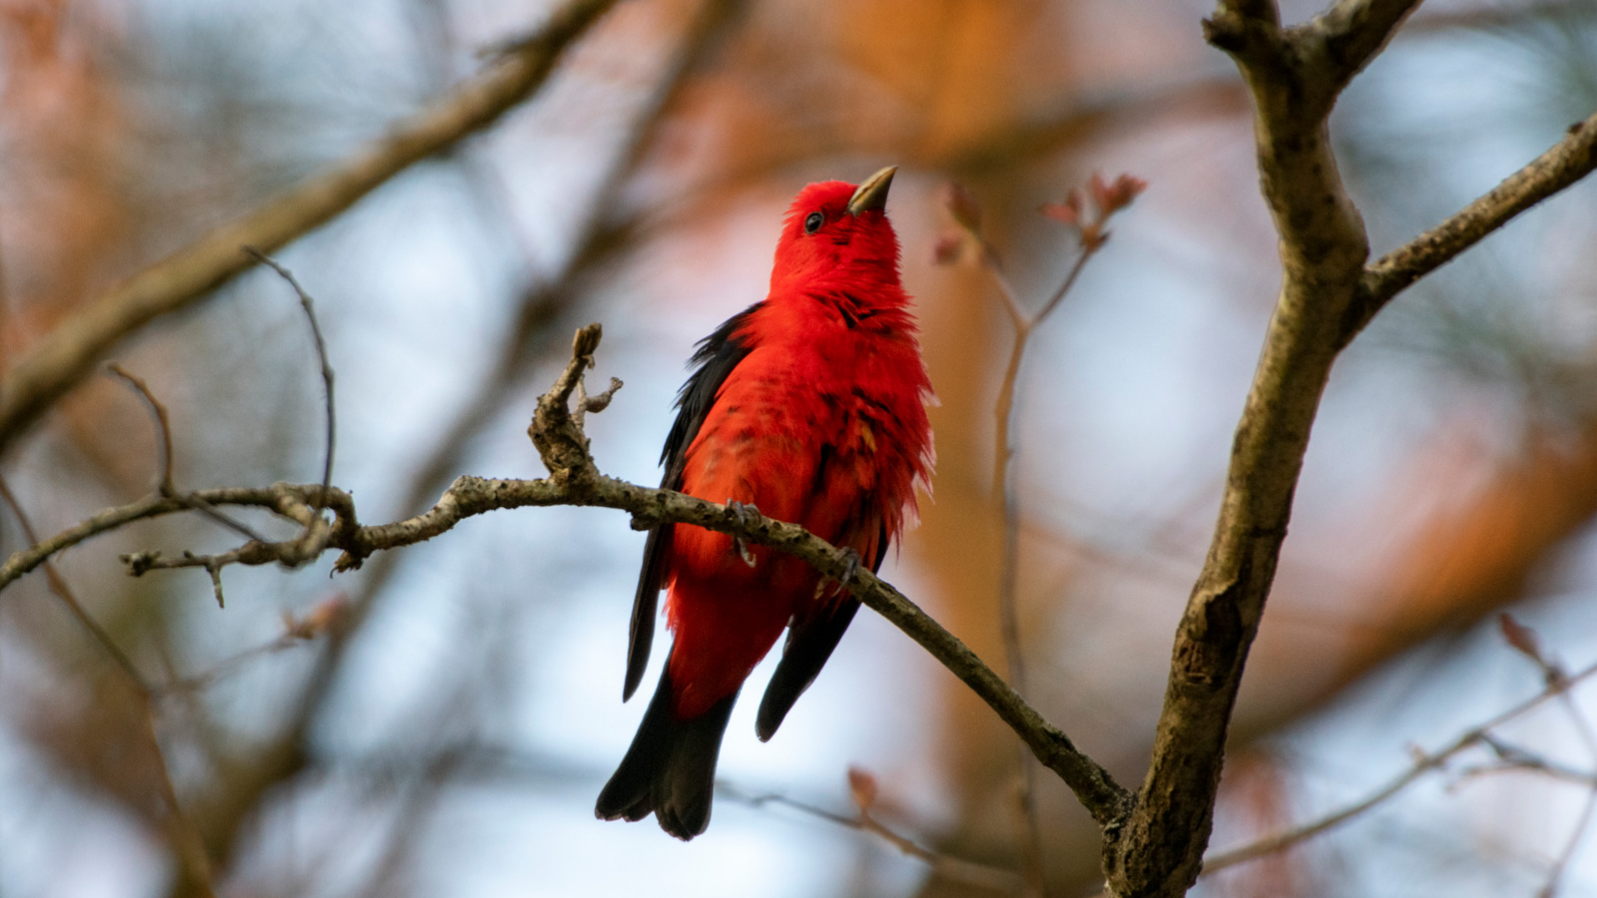 A male Scarlet Tanager perches on a branch, viewed from below as it looks ahead.